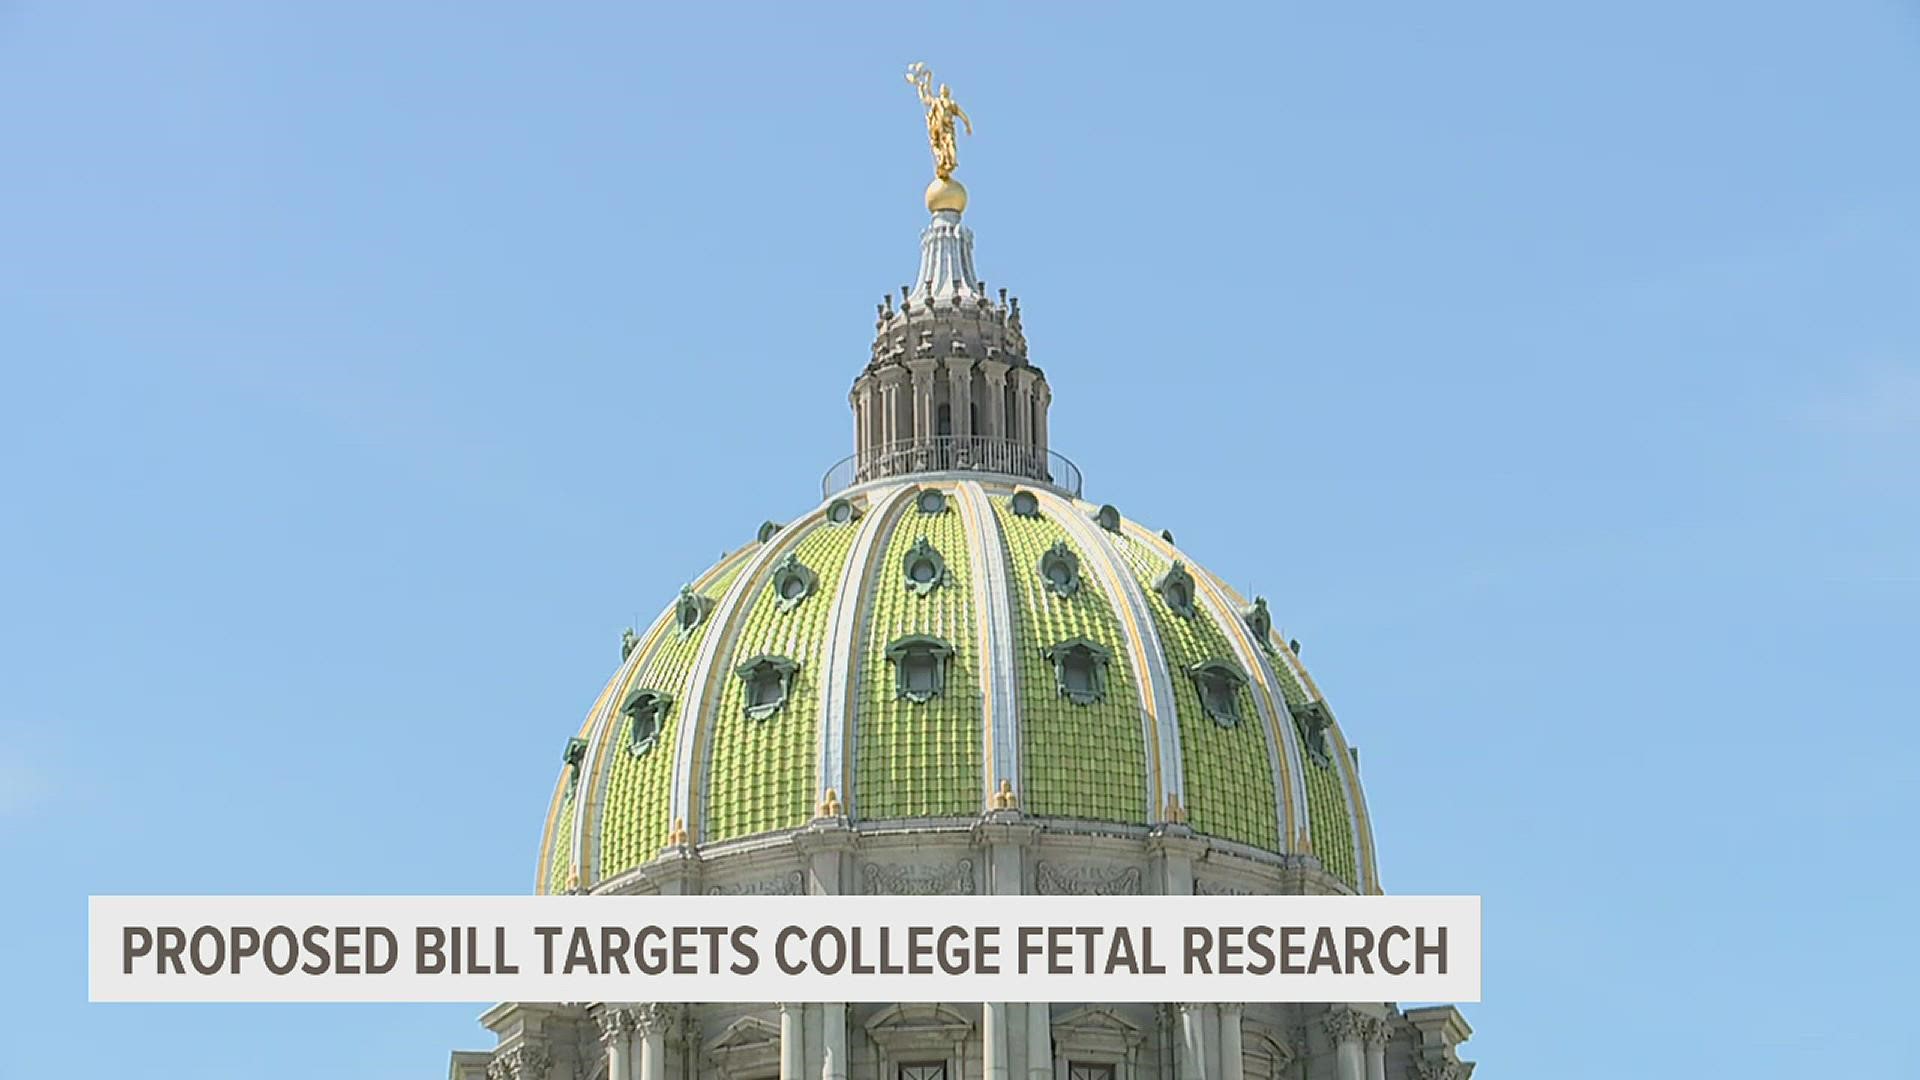 The measure is targeted specifically at the University of Pittsburgh for its fetal tissue research.